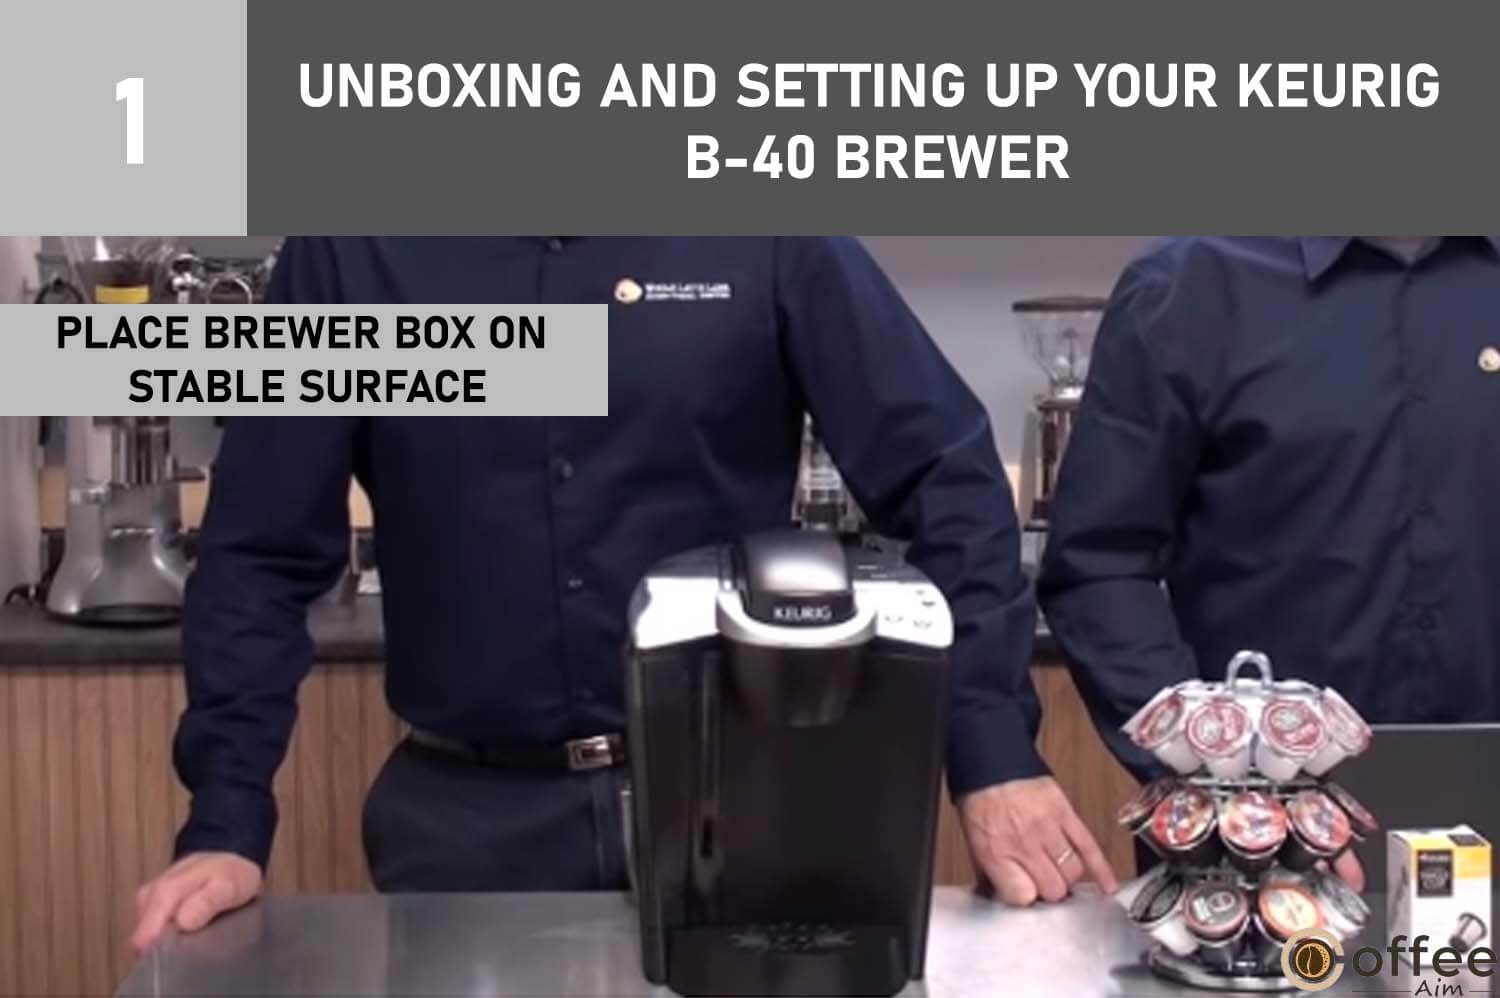 This image illustrates the process of "placing the Brewer box" as part of the comprehensive guide titled "Unboxing and Setting Up Your Keurig B-40 Brewer" for the informative article on "How to Use the Keurig B-40."